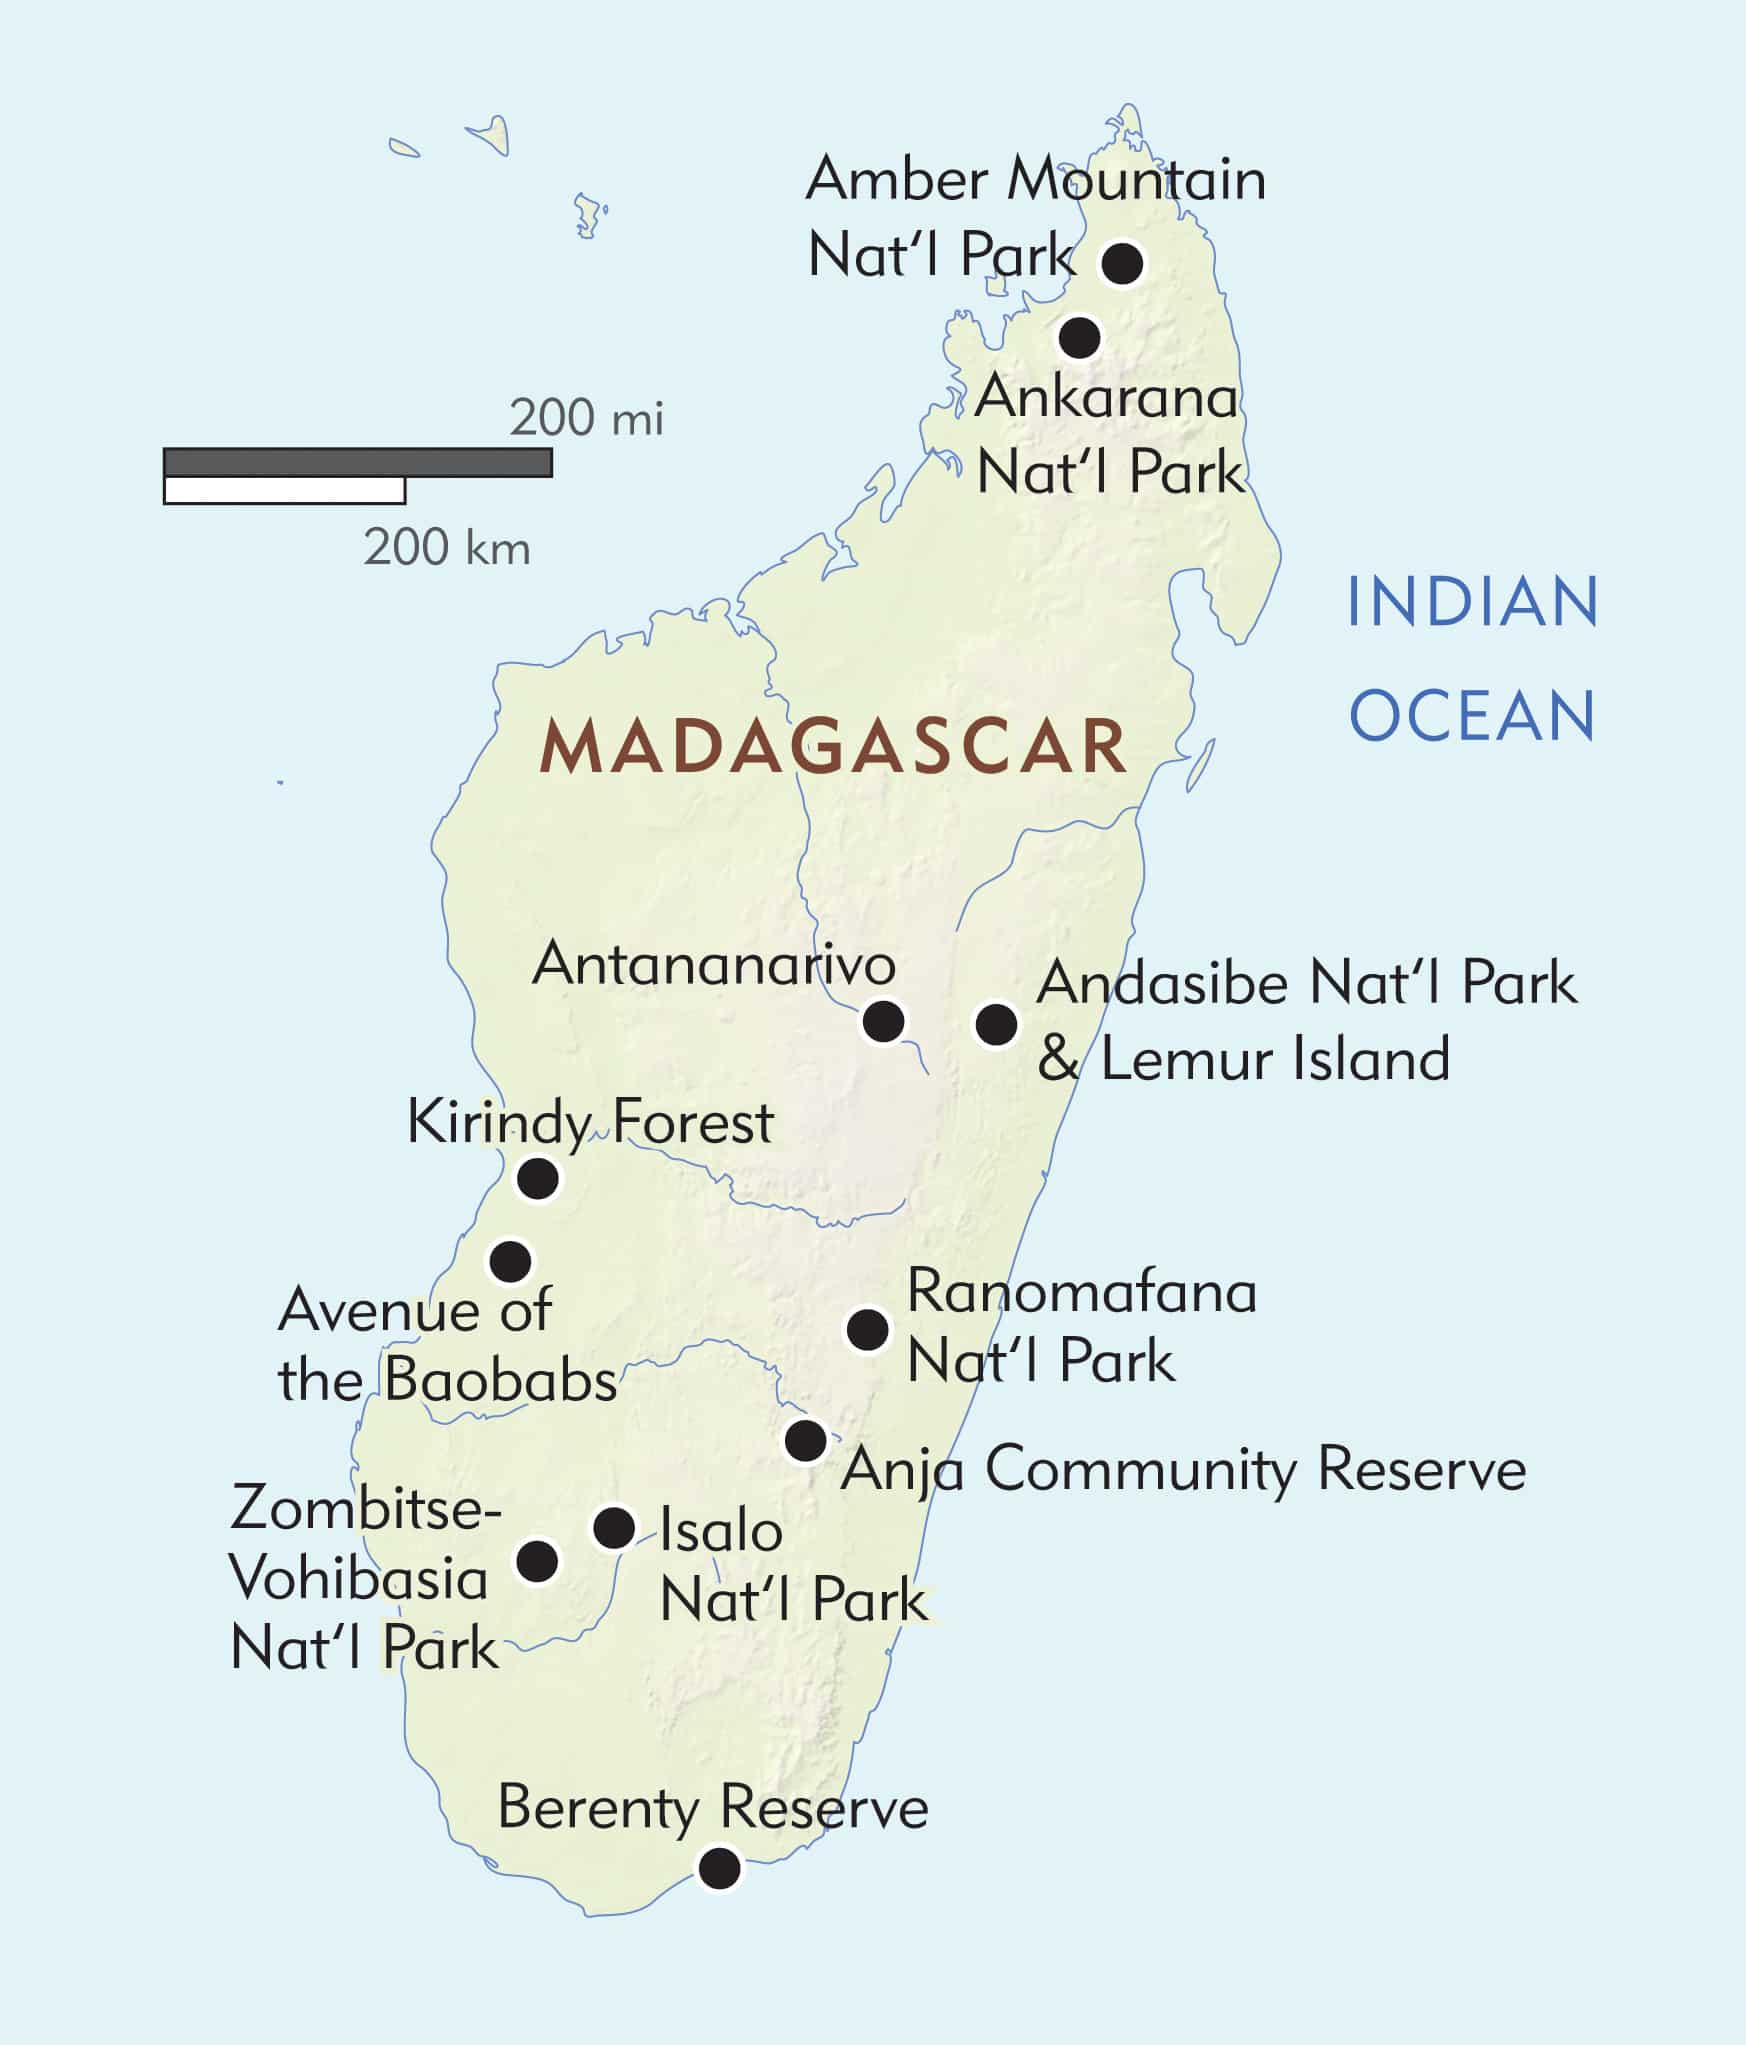 Madagascar Country Information ⋅ Natucate